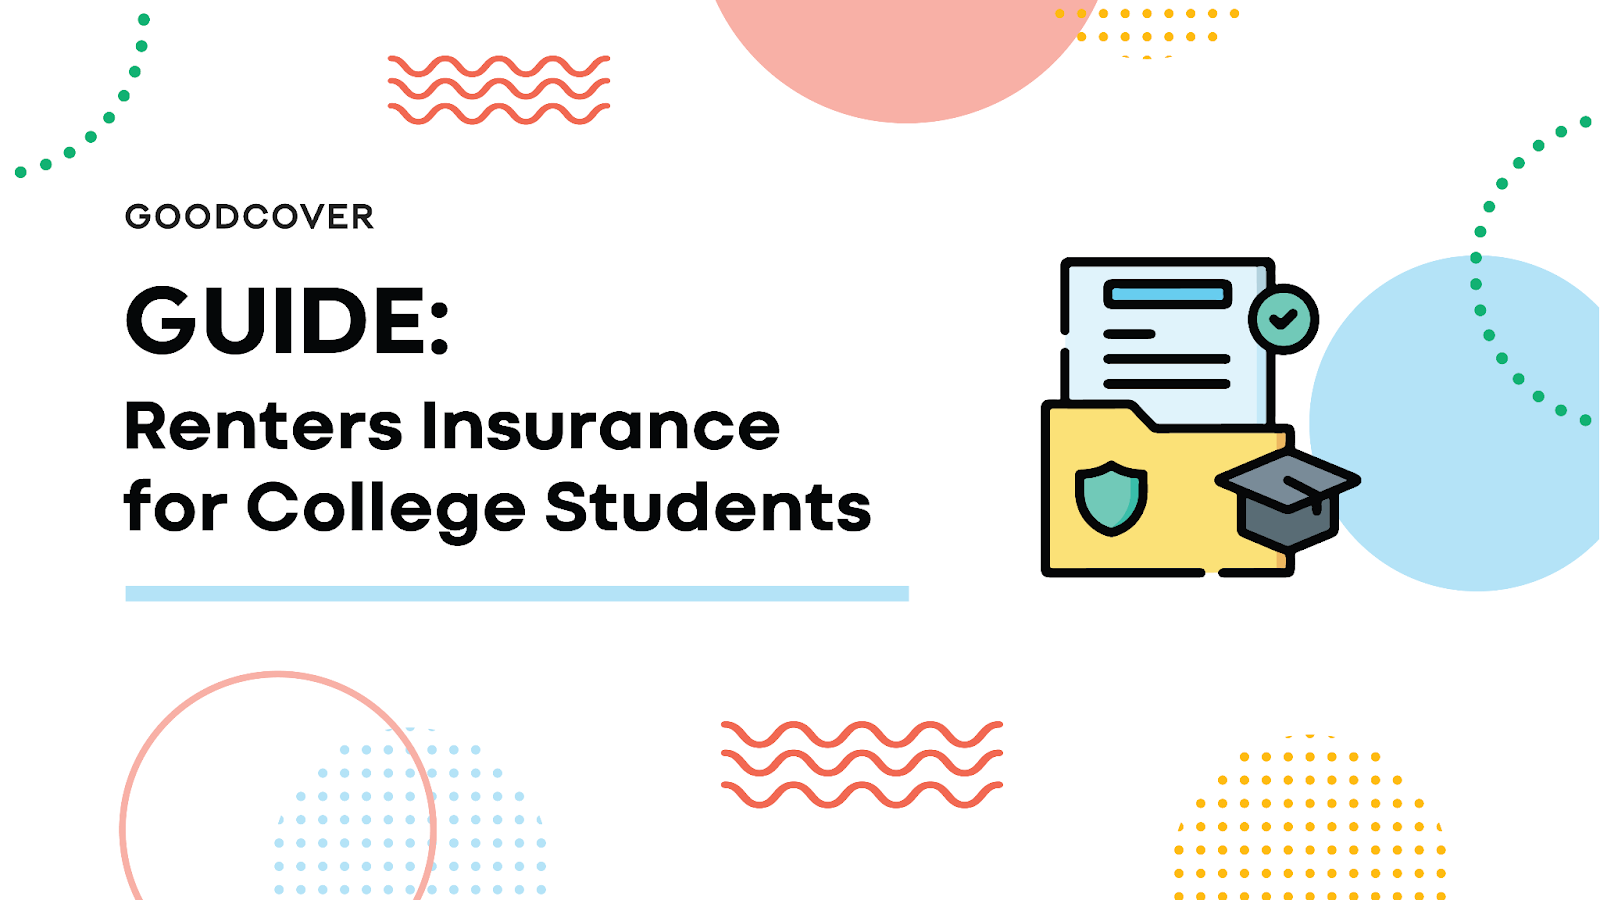 Guide: Renters Insurance for College Students